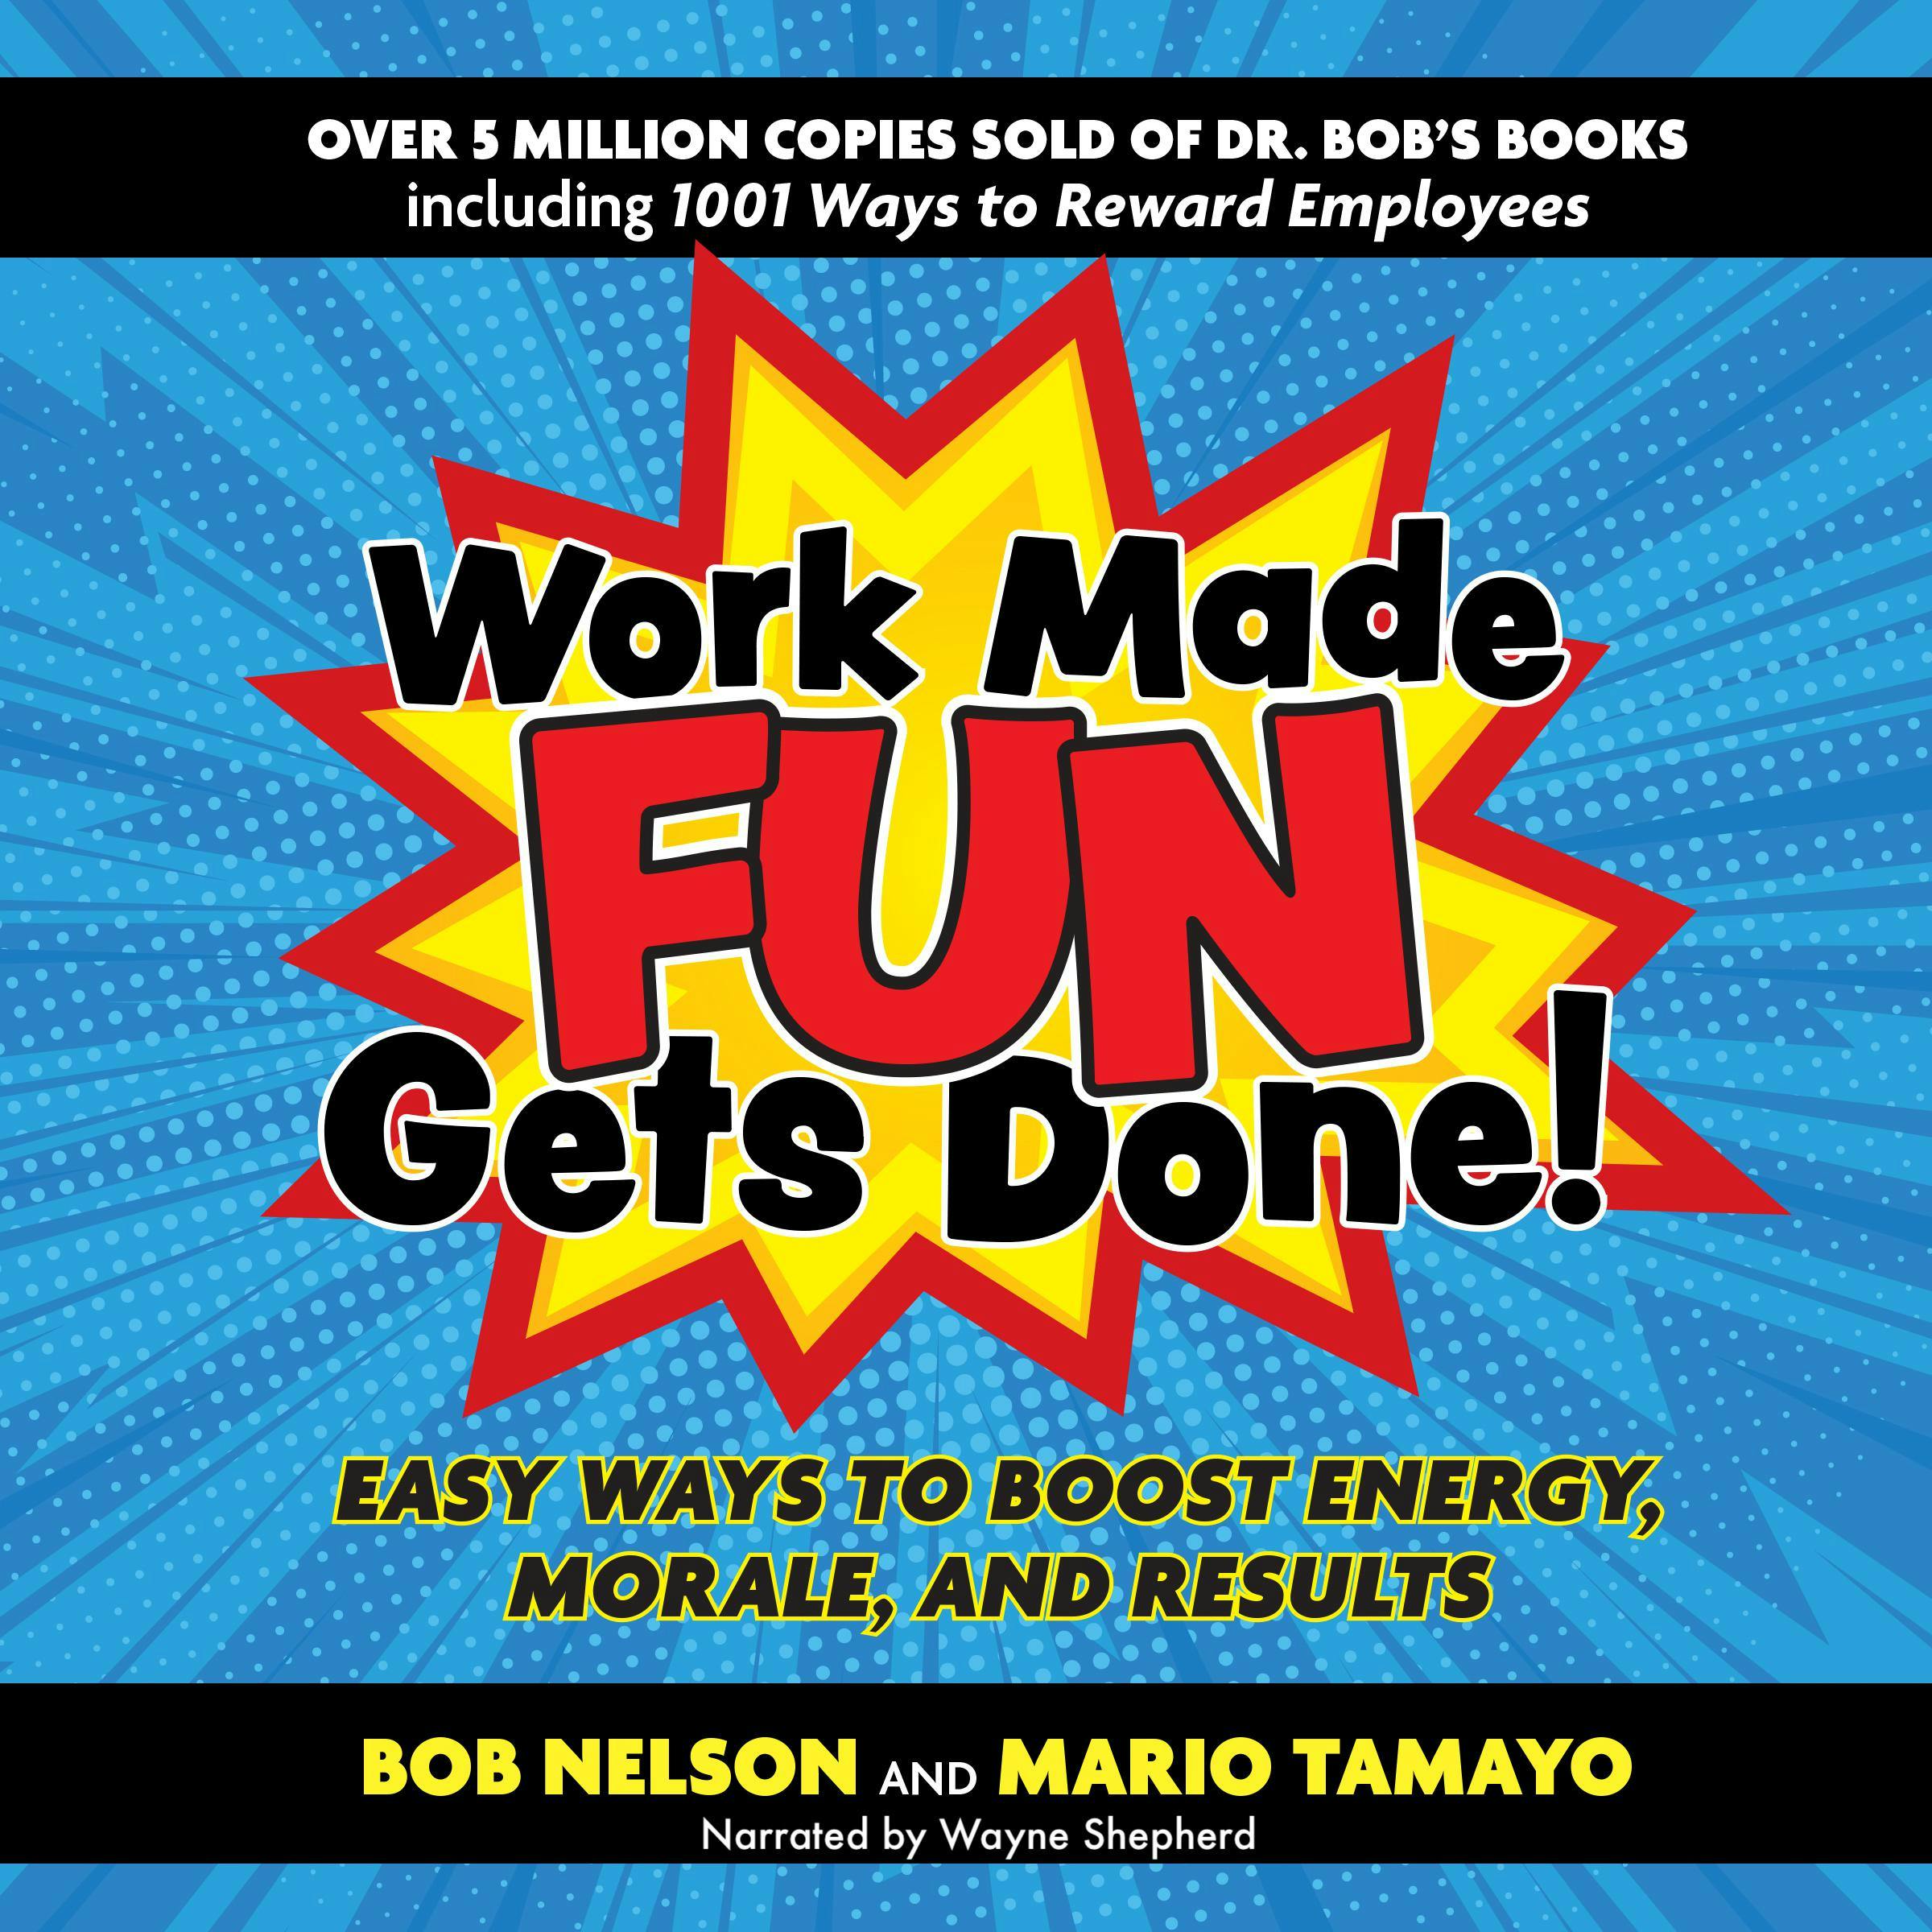 Work Made Fun Gets Done!: Easy Ways to Boost Energy, Morale, and Results - Felix Mario Tamayo, Bob Nelson